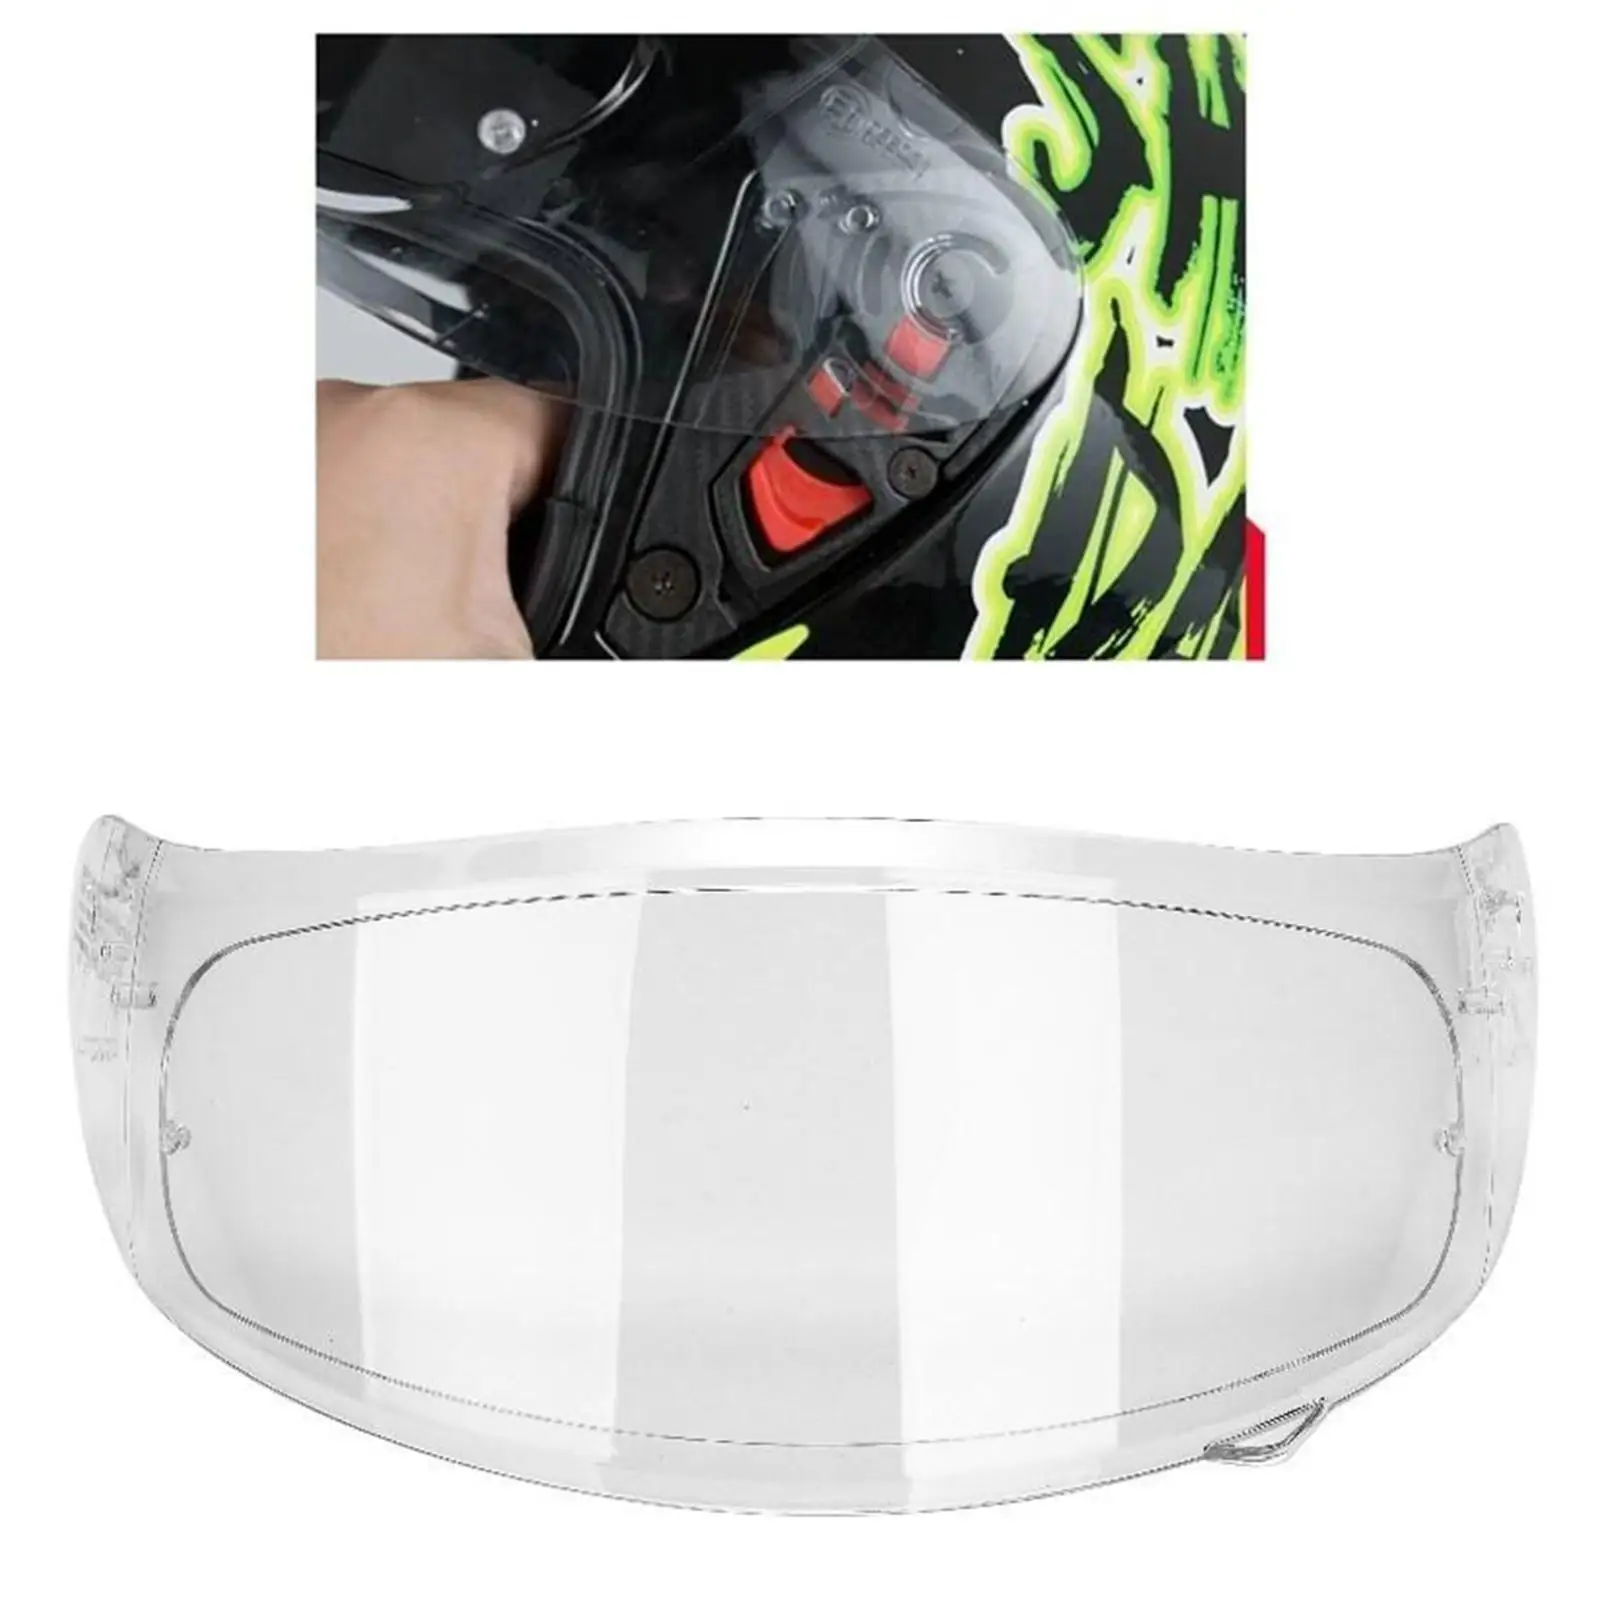 Full face motorcycle lens suitable for MT MT